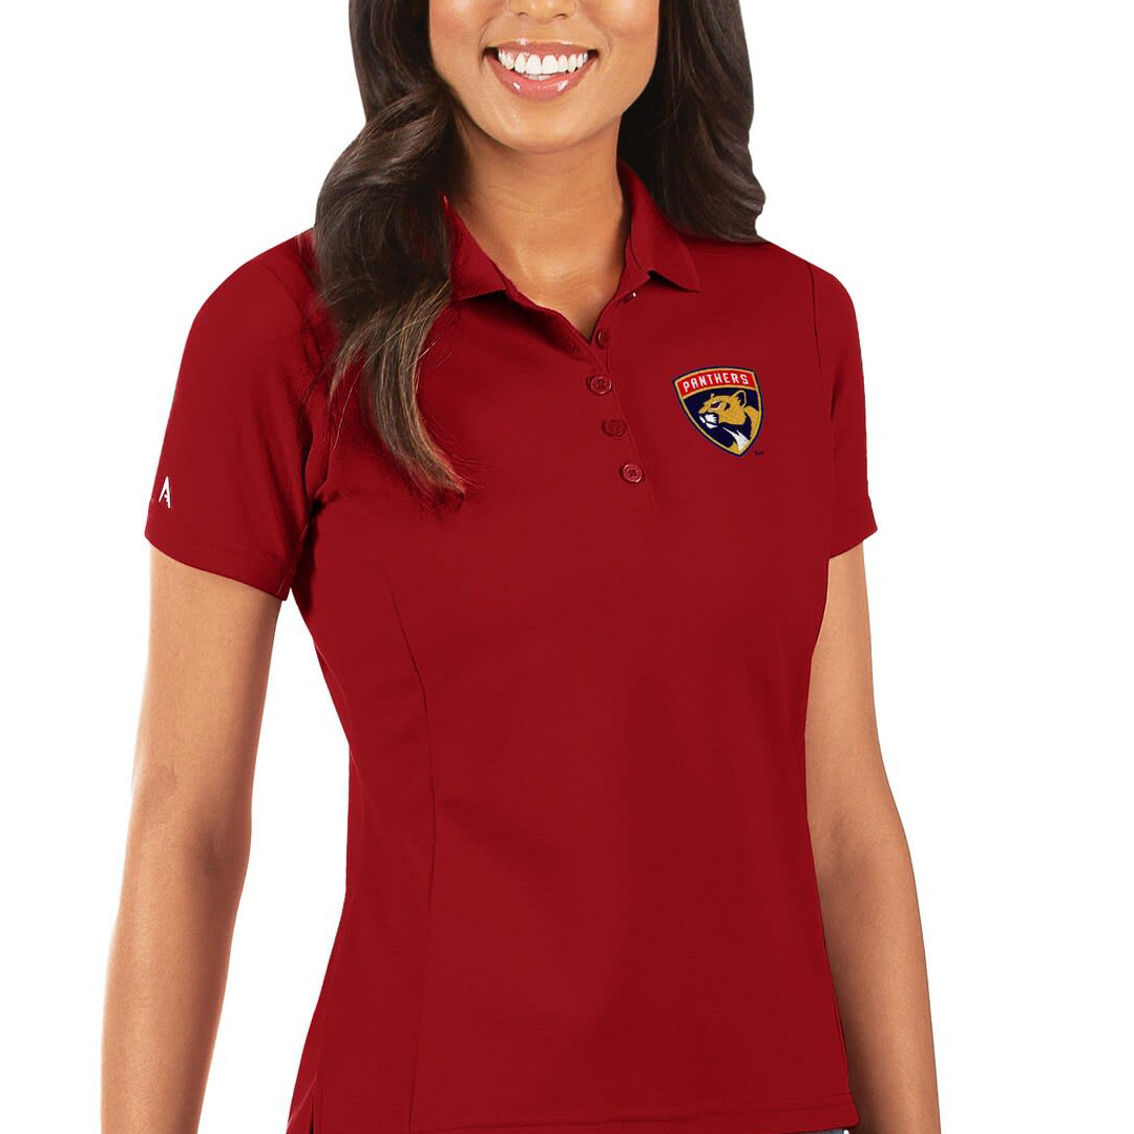 Antigua Women's Red Florida Panthers Legacy Pique Polo - Image 2 of 2